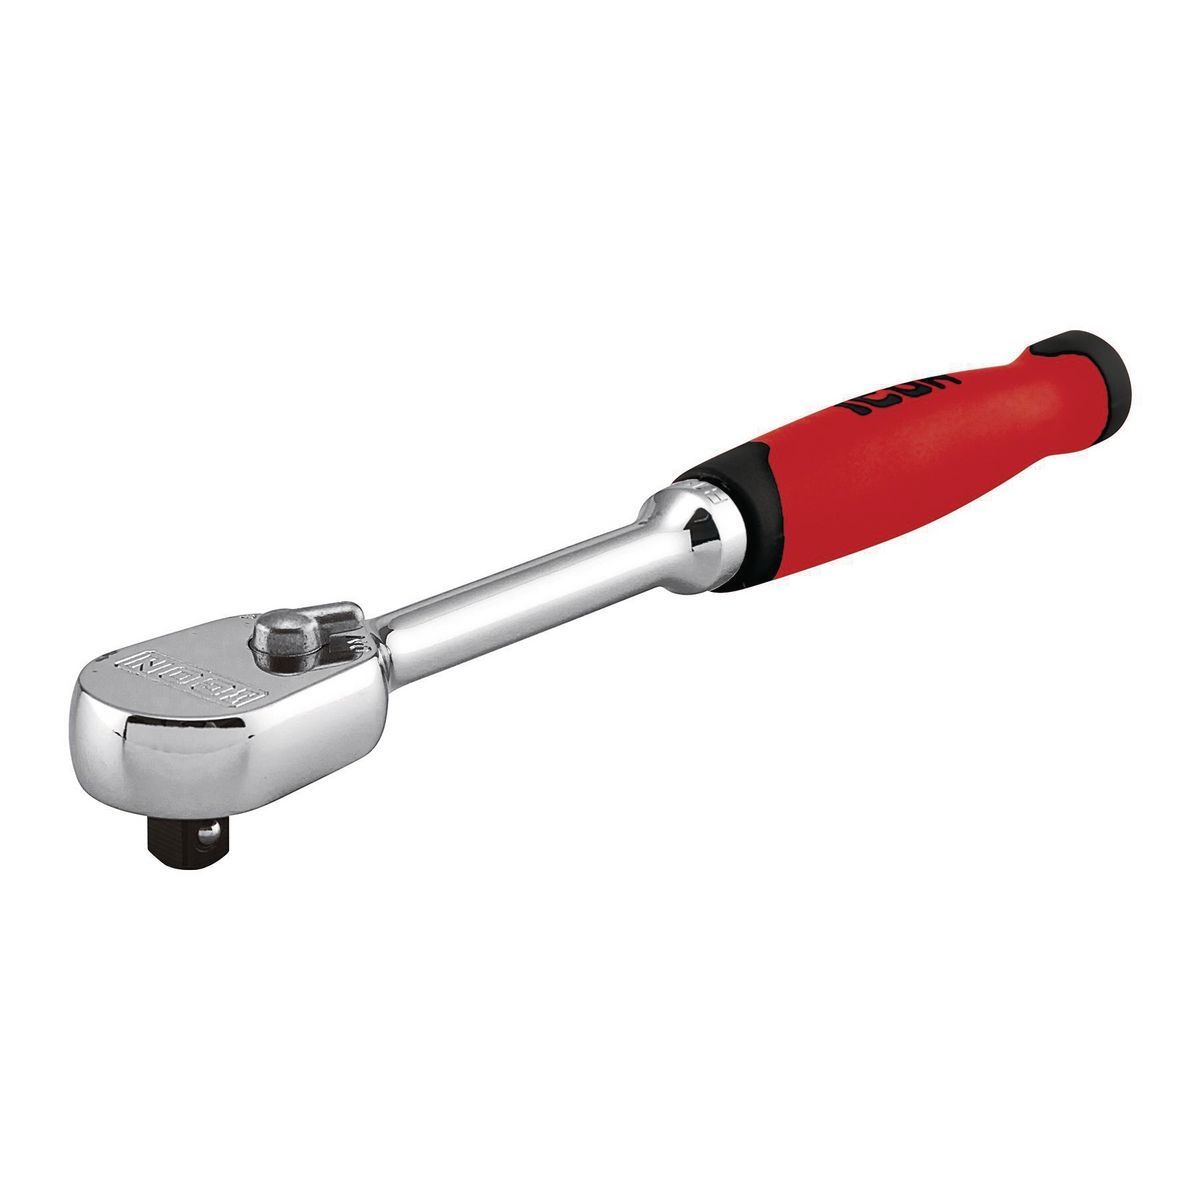 ICON 1/4 in. Drive Professional Low-Profile Ratchet with Comfort Grip